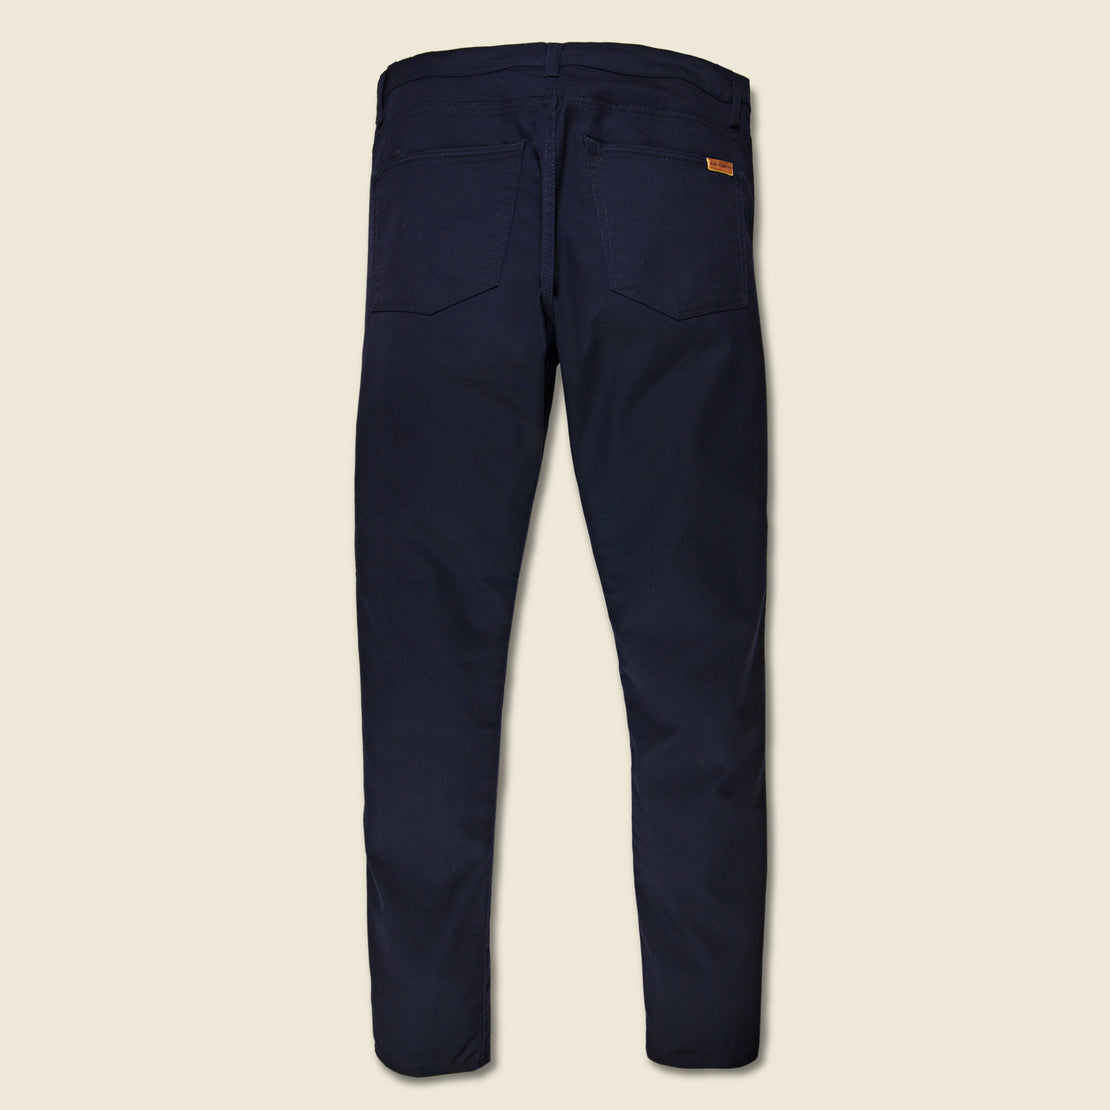 Vicious Pant - Dark Navy - Carhartt WIP - STAG Provisions - Pants - Twill